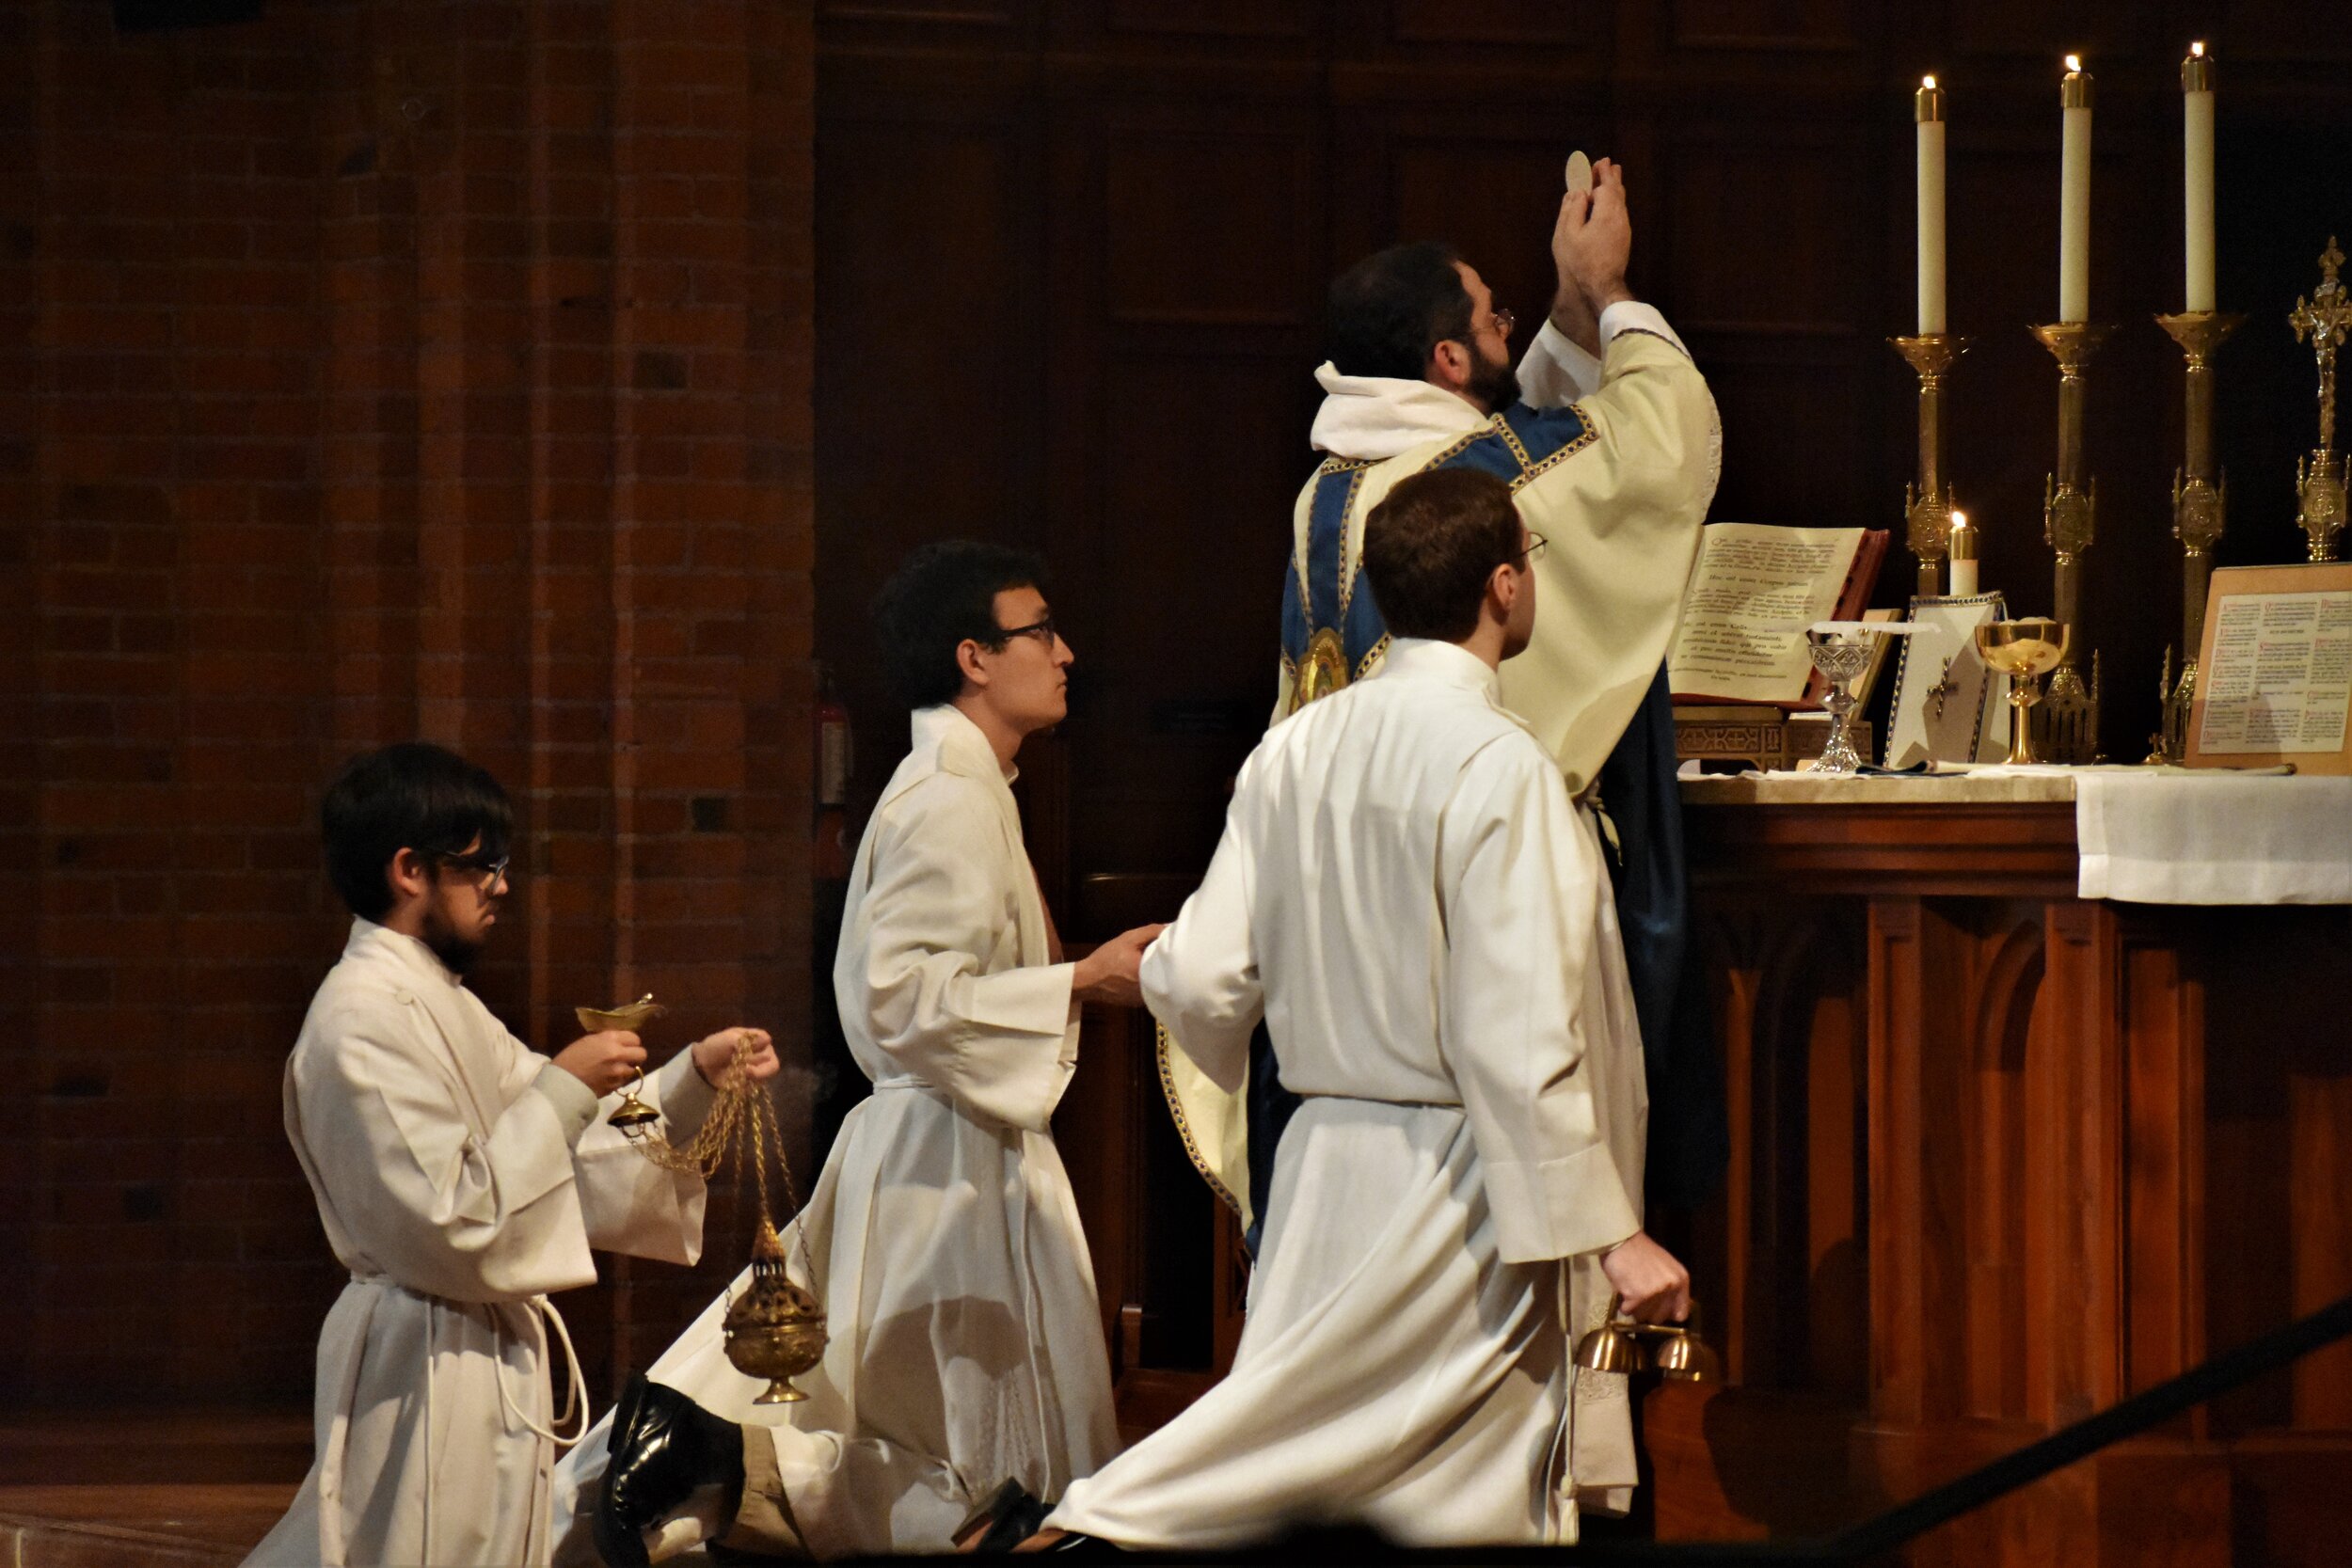 October 2019 Choral Mass in the Dominican Rite